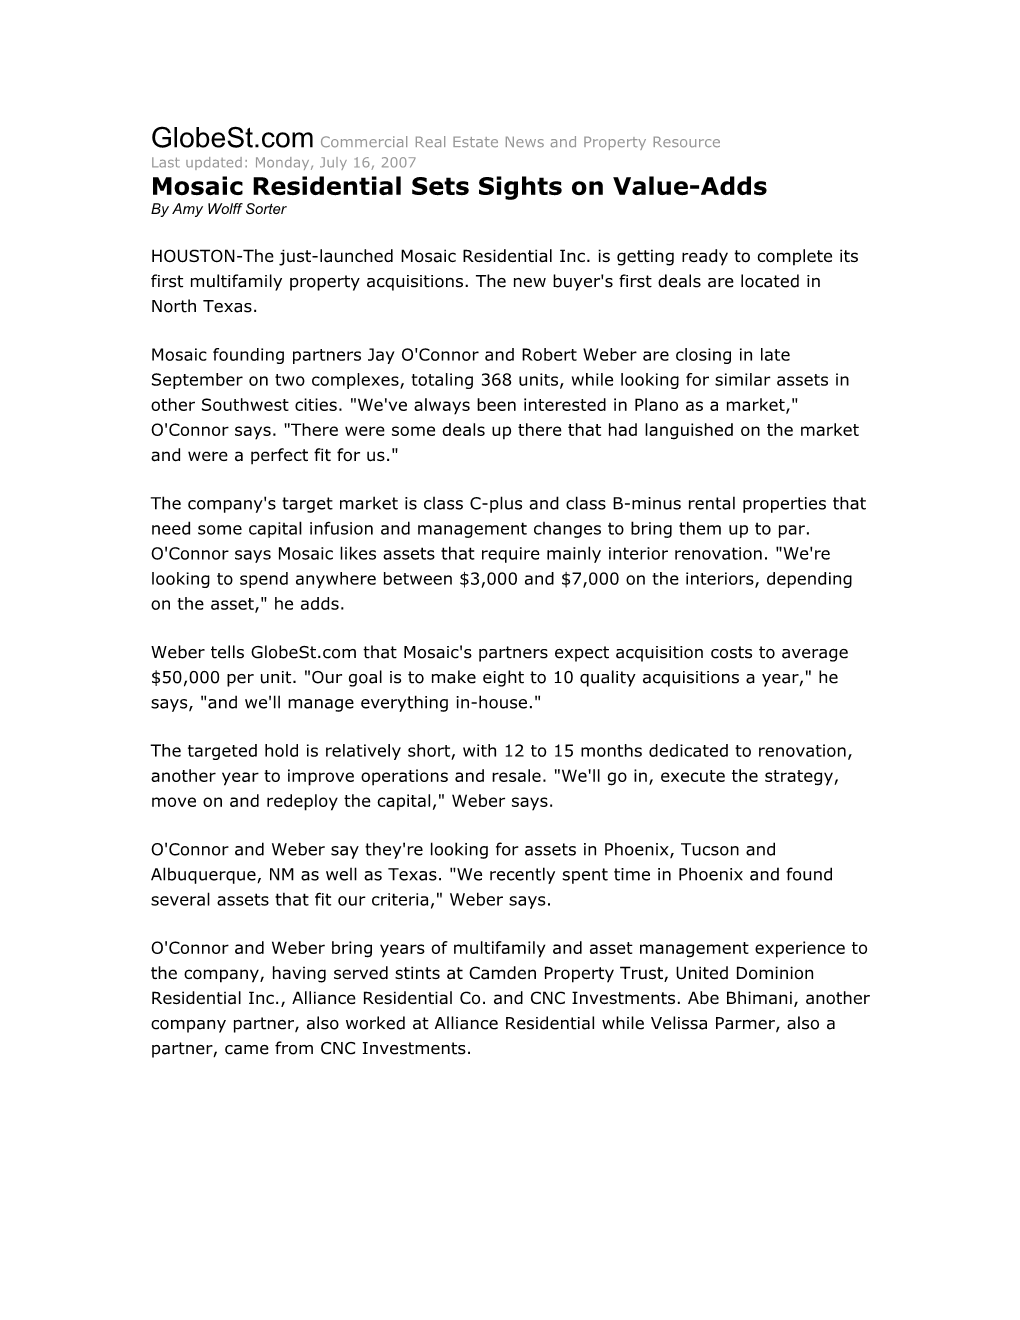 Mosaic Residential Sets Sights on Value-Adds